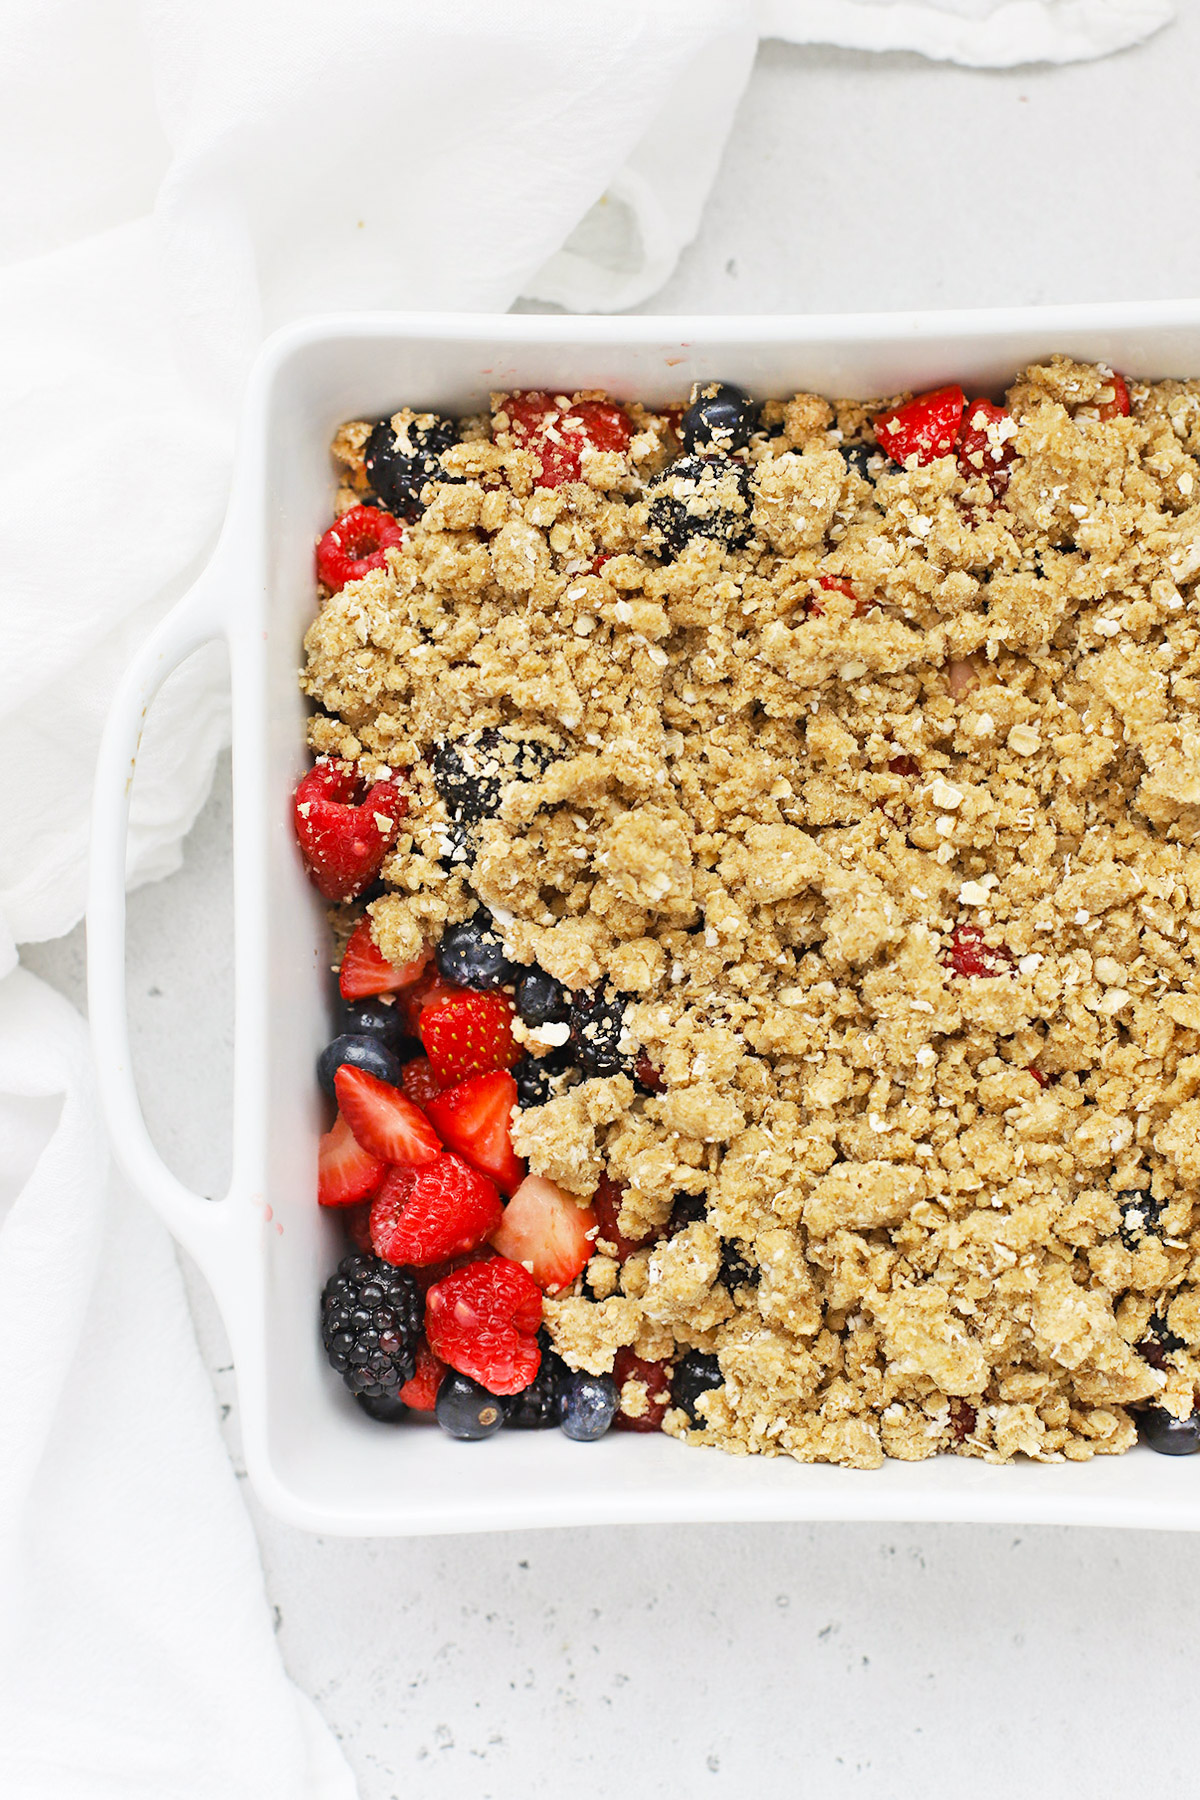 Overhead view of gluten-free crumble topping being added to a mixed berry crisp filling